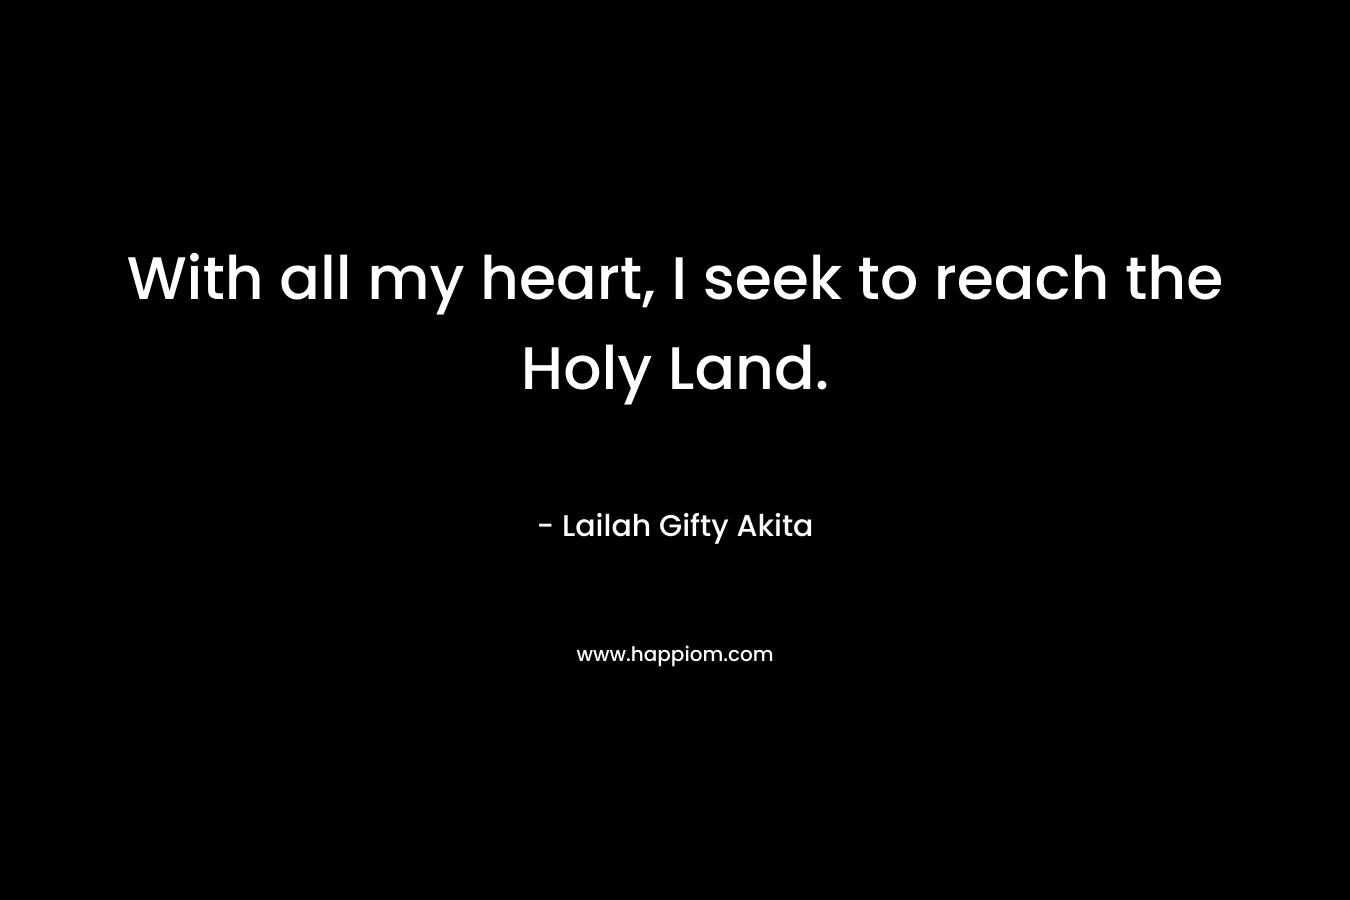 With all my heart, I seek to reach the Holy Land.